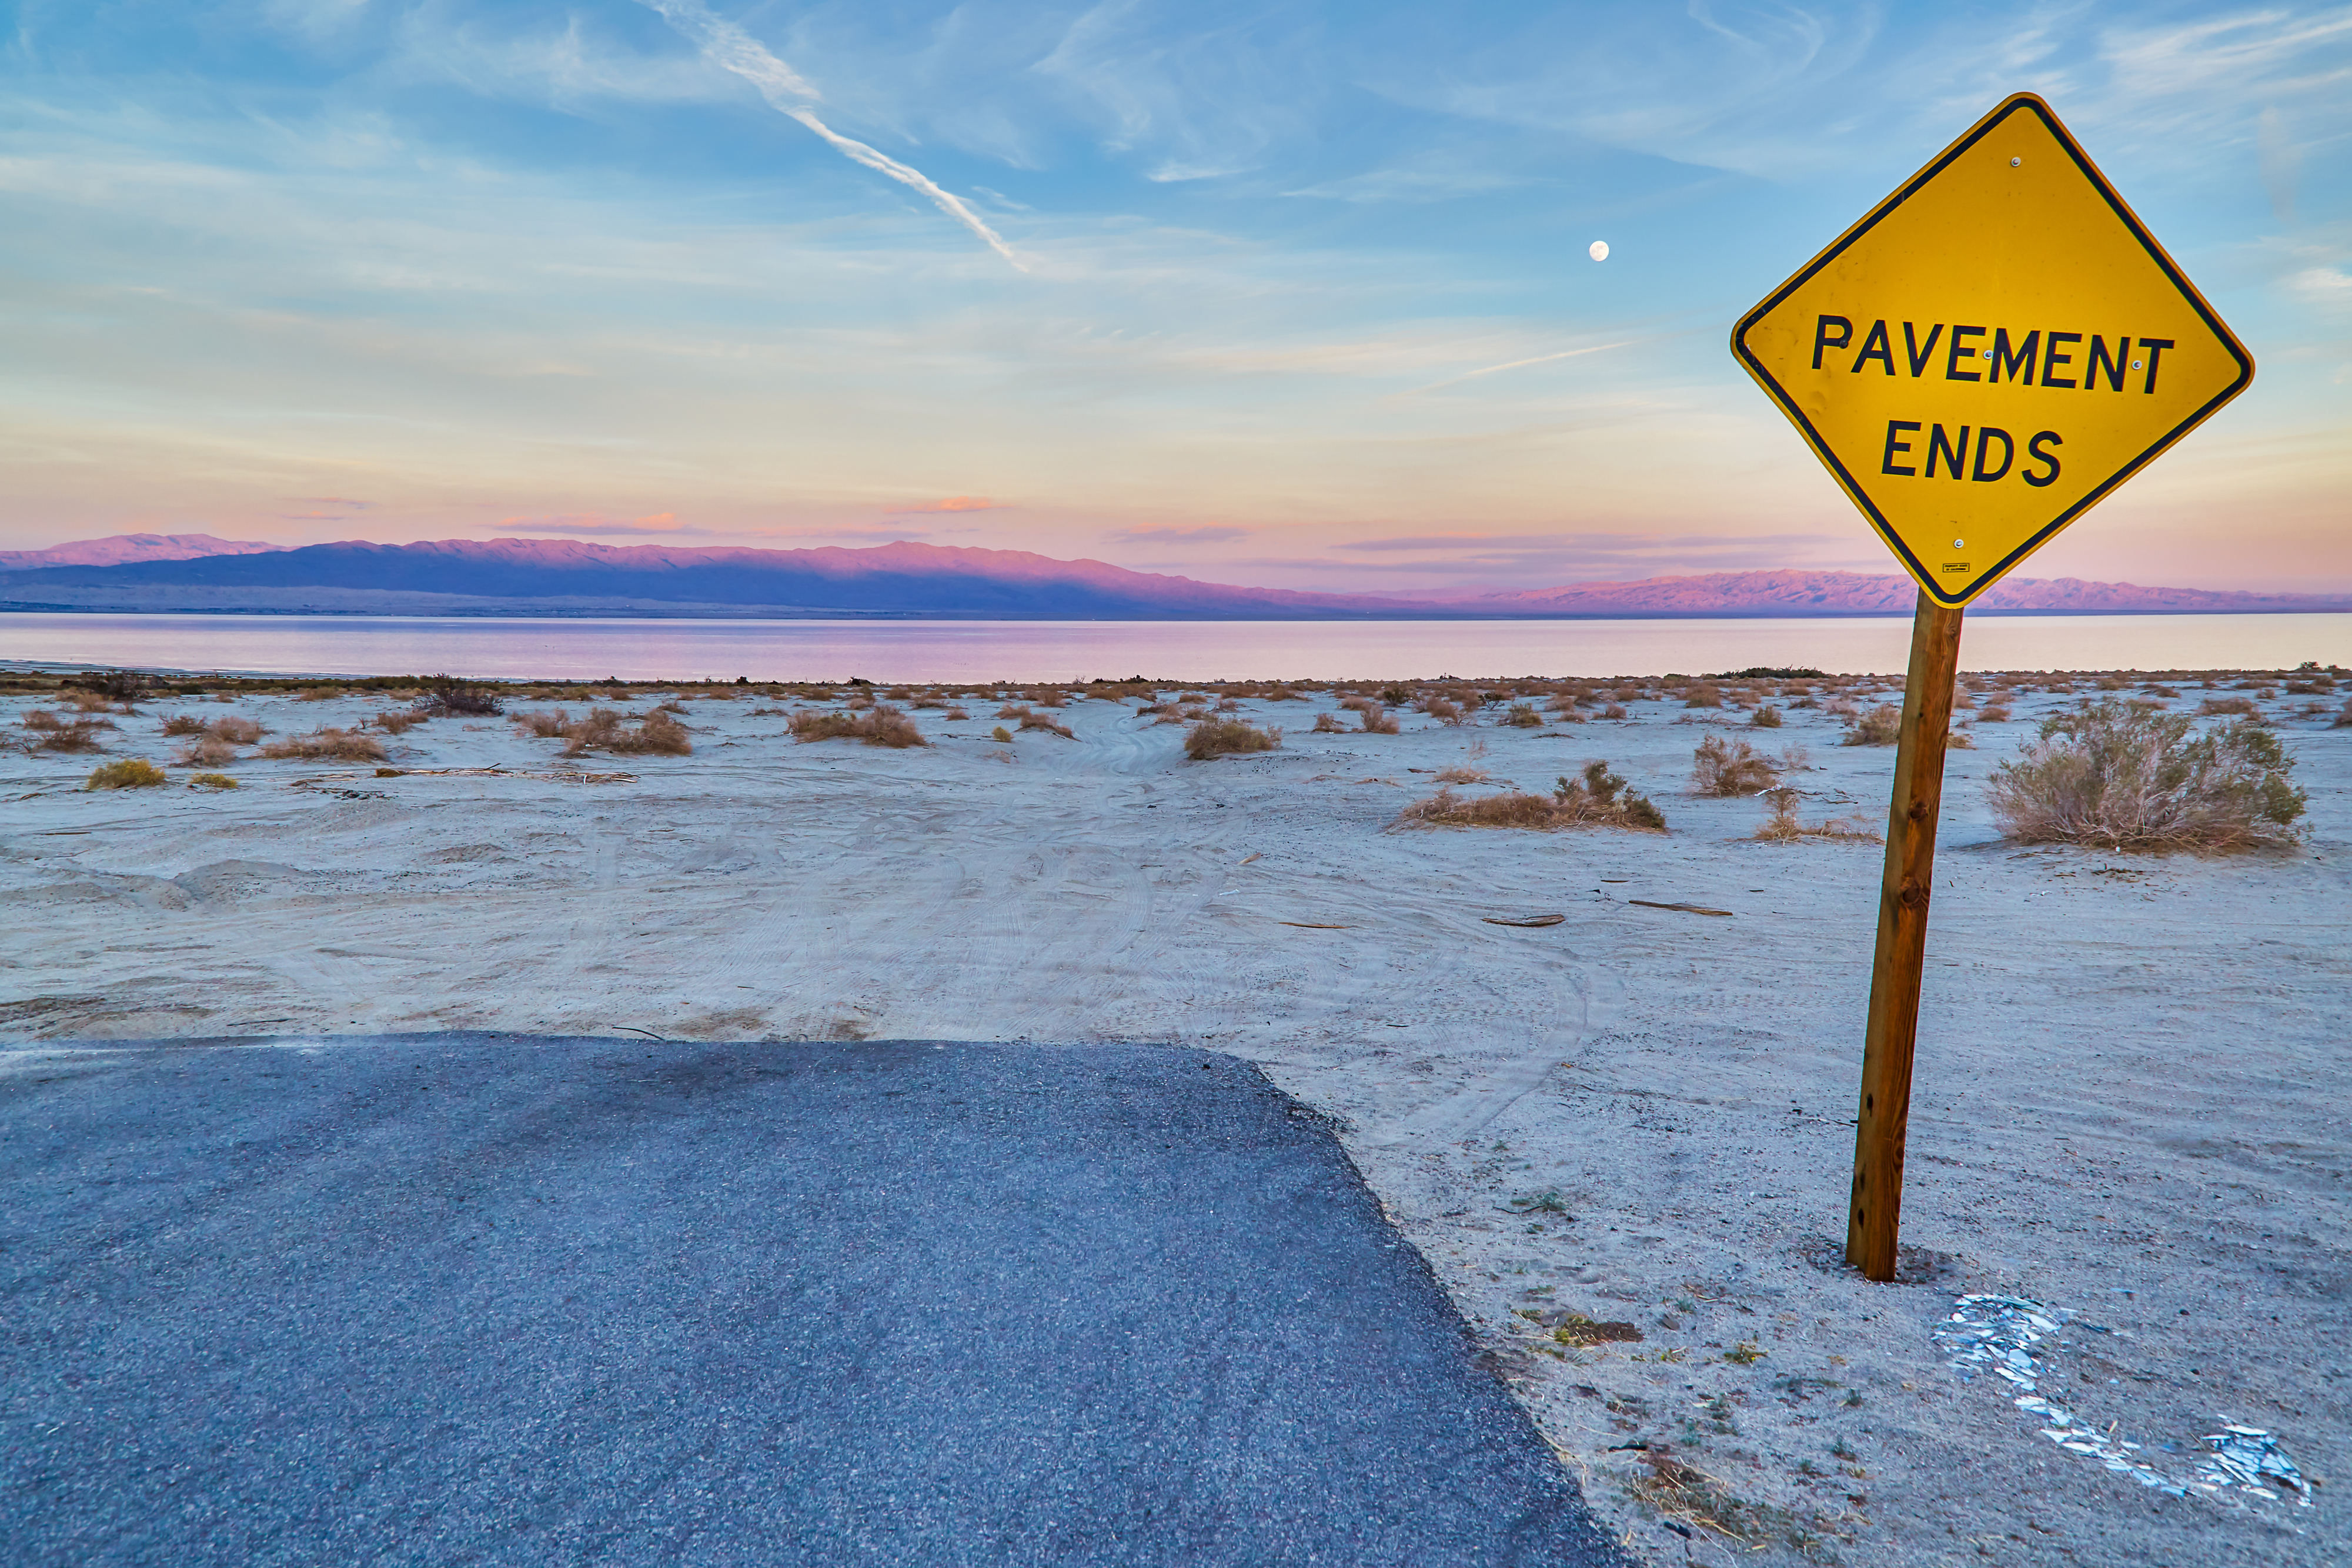 Sign reading &quot;PAVEMENT ENDS&quot; next to a road transitioning into a natural landscape at dusk